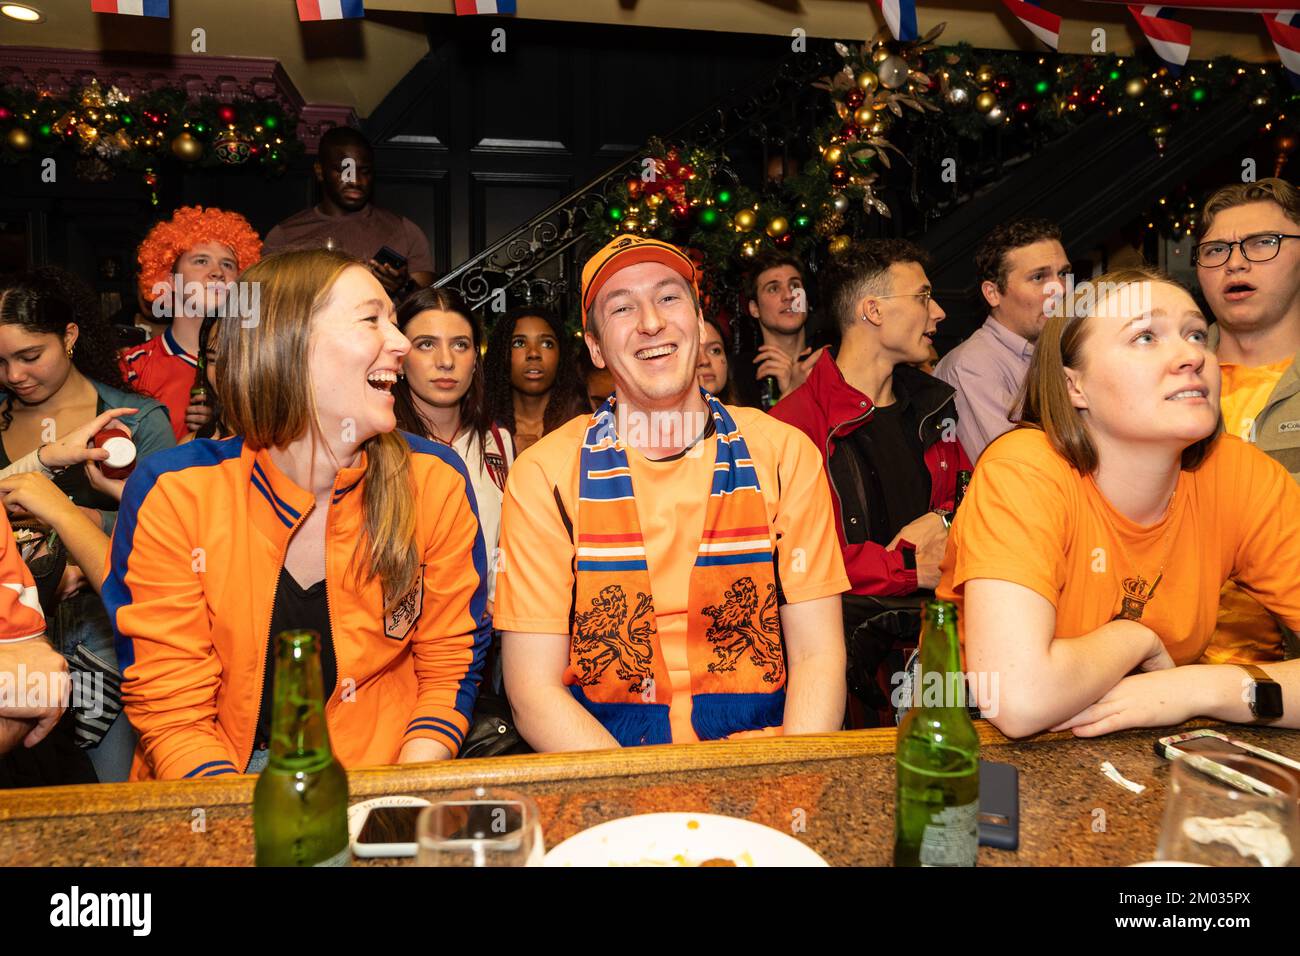 Fans of The Netherlands football team reacting and drinking during the game against USA at Qatar World Cup at Hurley's Saloon in New York on December 3, 2022 Stock Photo